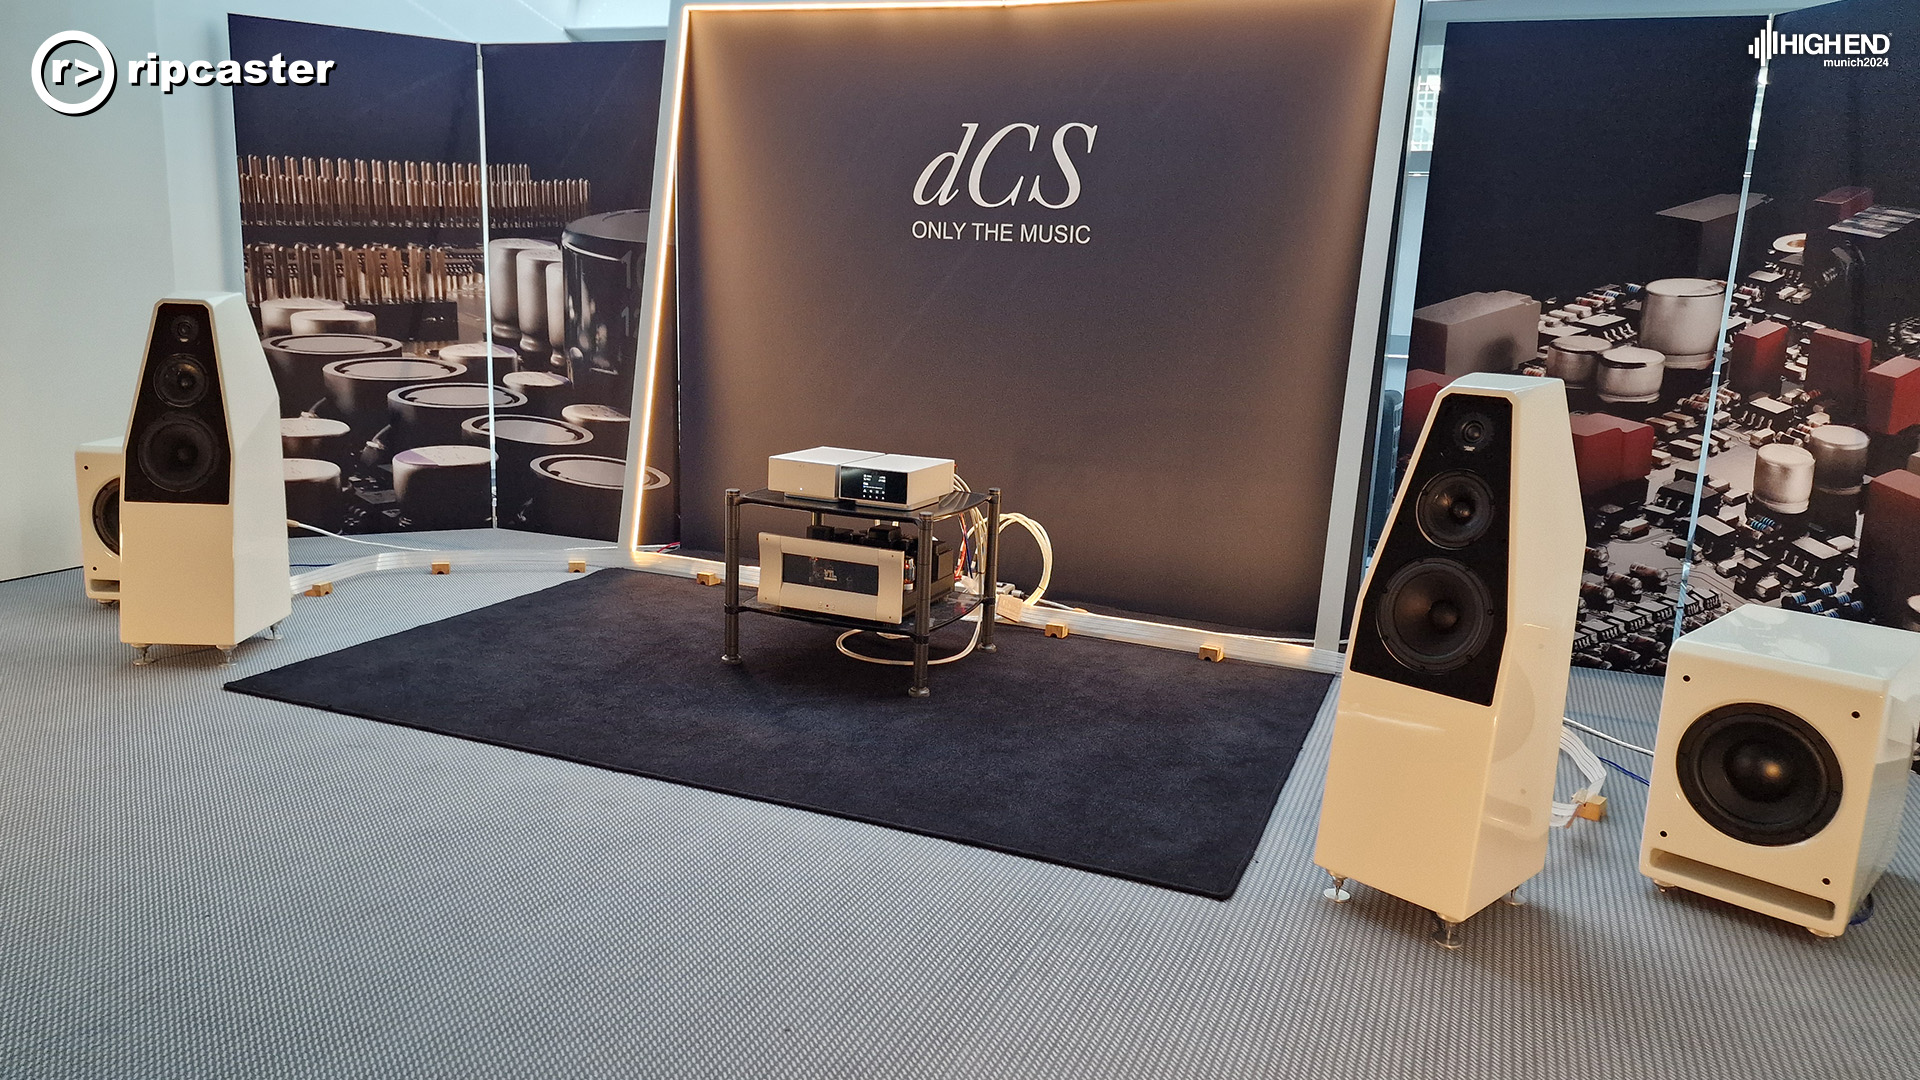 dcs.  A pair of floorstanding white and black speakers with other pieces of hifi equipment between